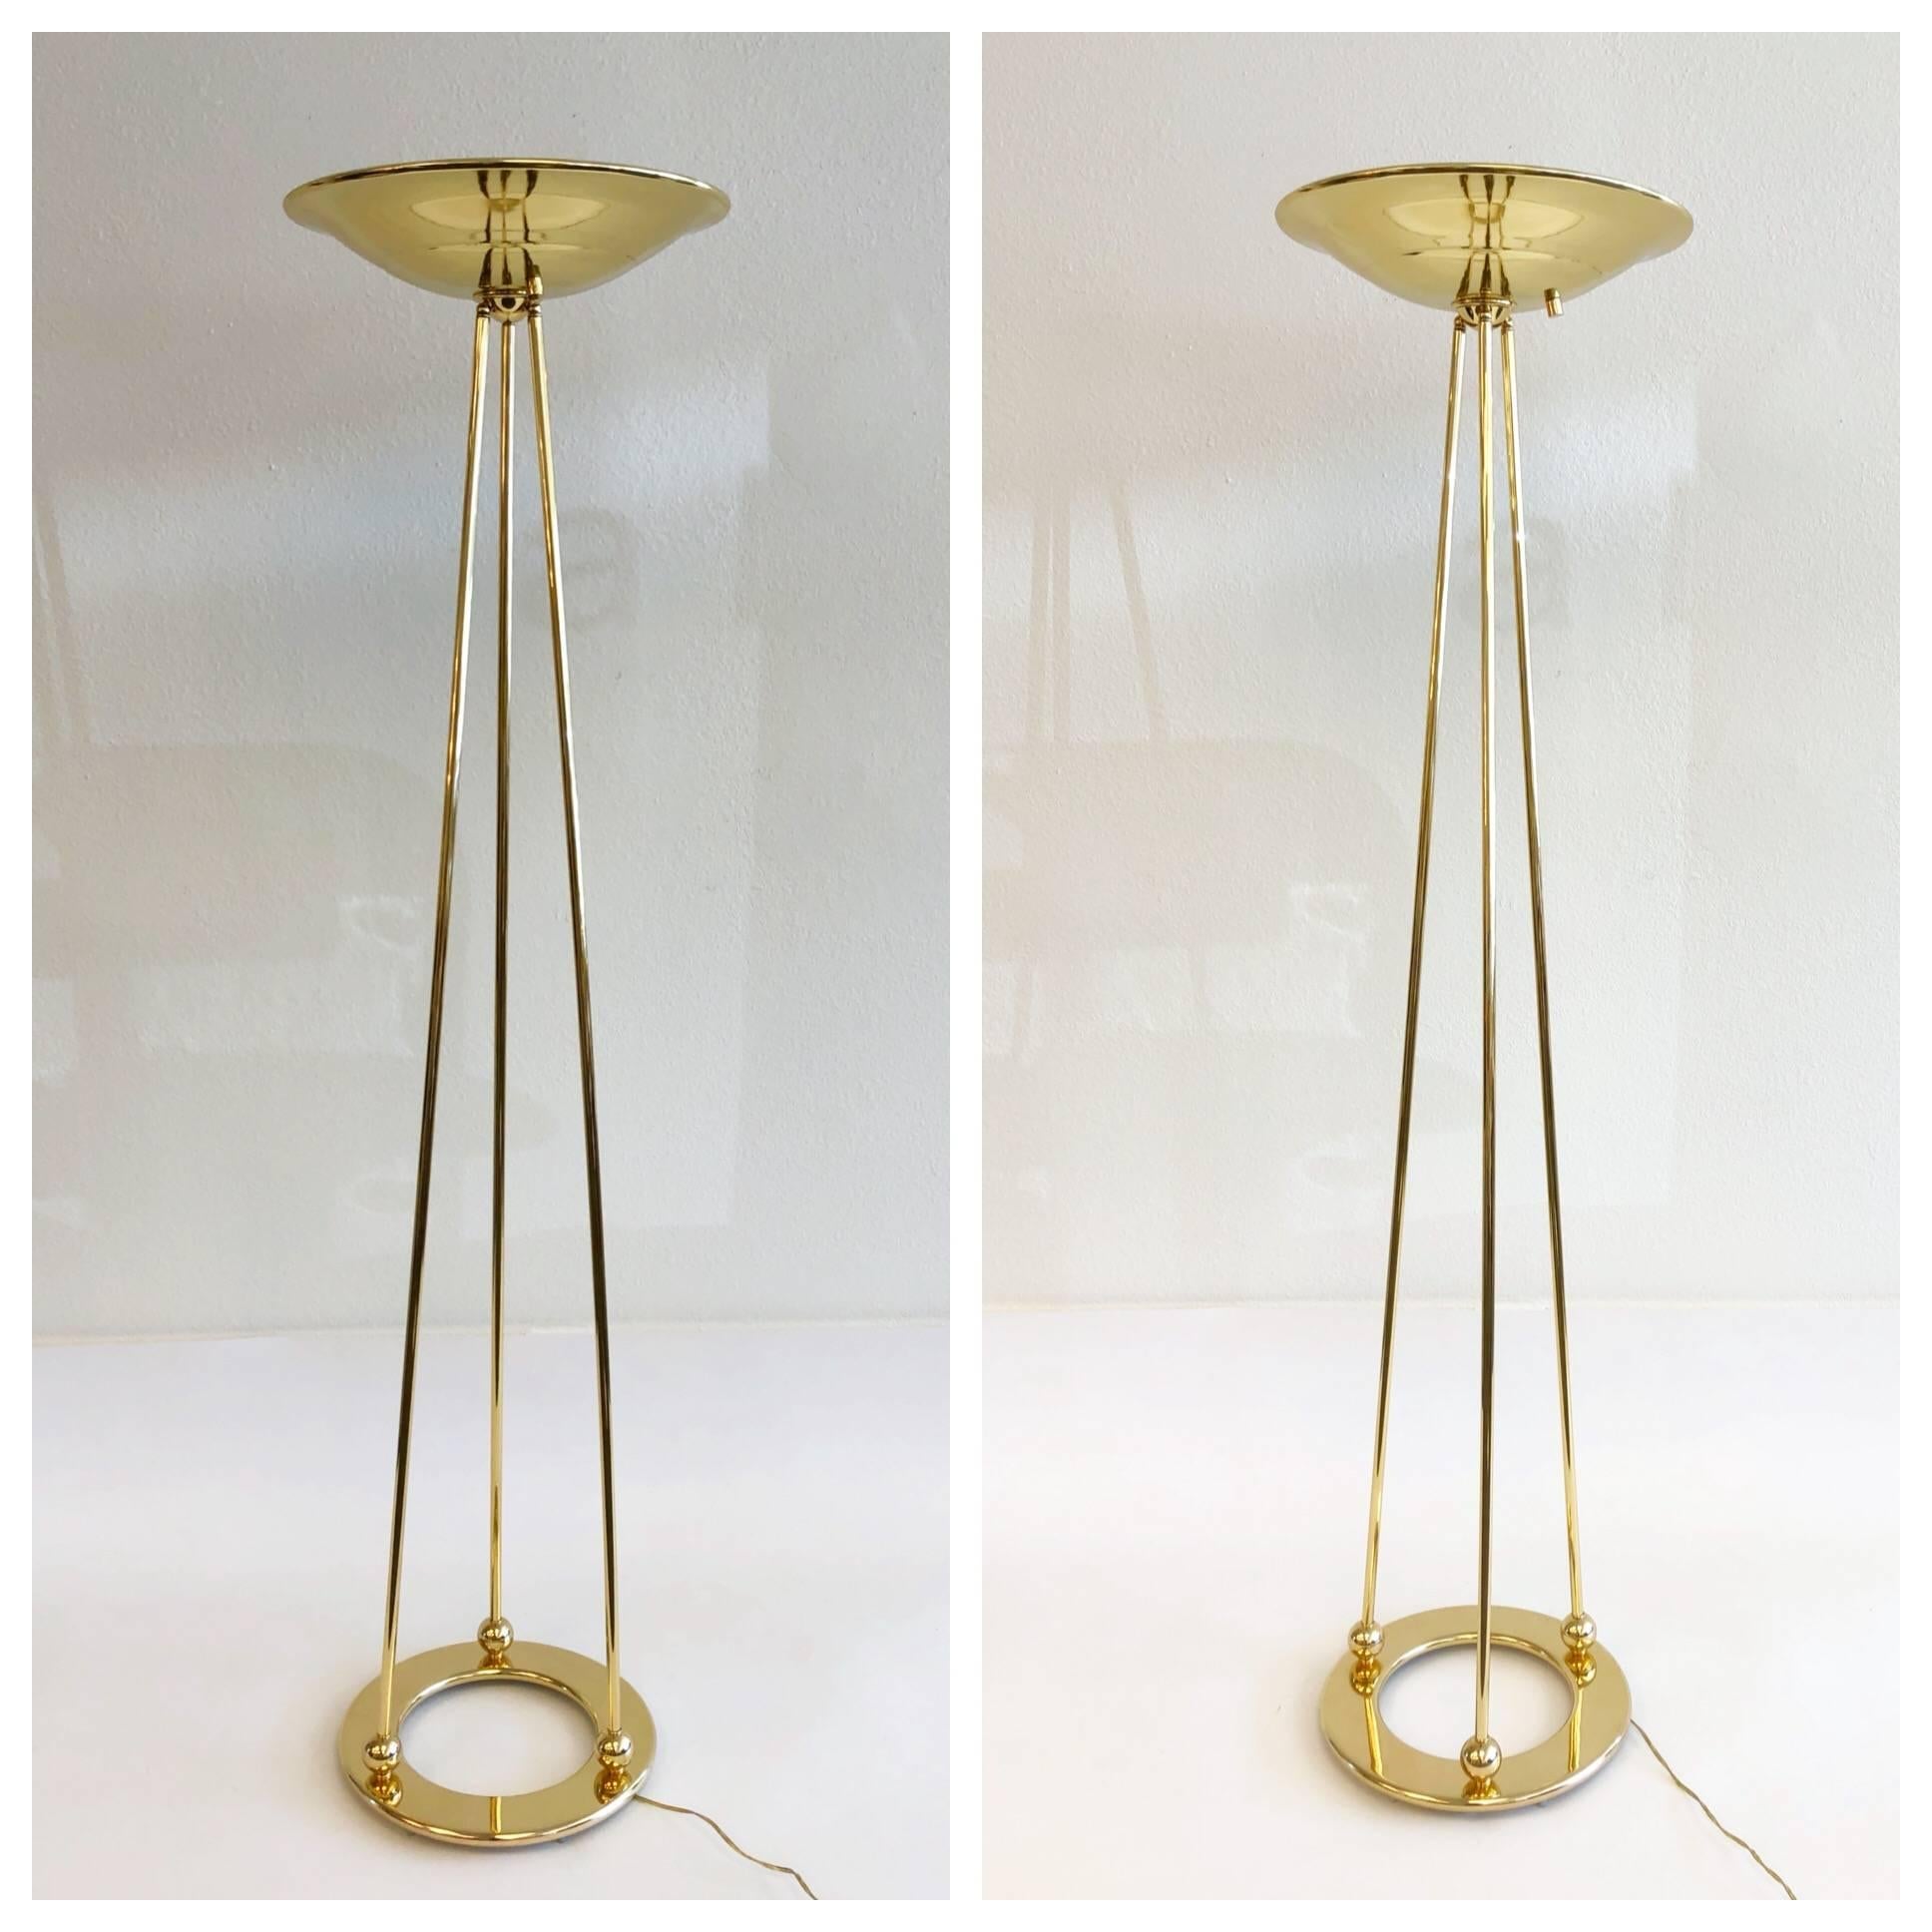 A beautiful pair of 1970s polish brass torchiere floor lamps by Casella.
The lamps have been newly rewired. The lamps have a full range dimmer on the shade and takes a 300w halogen bulb. Show minor wear consistent with age. 

Dimensions: 73” high